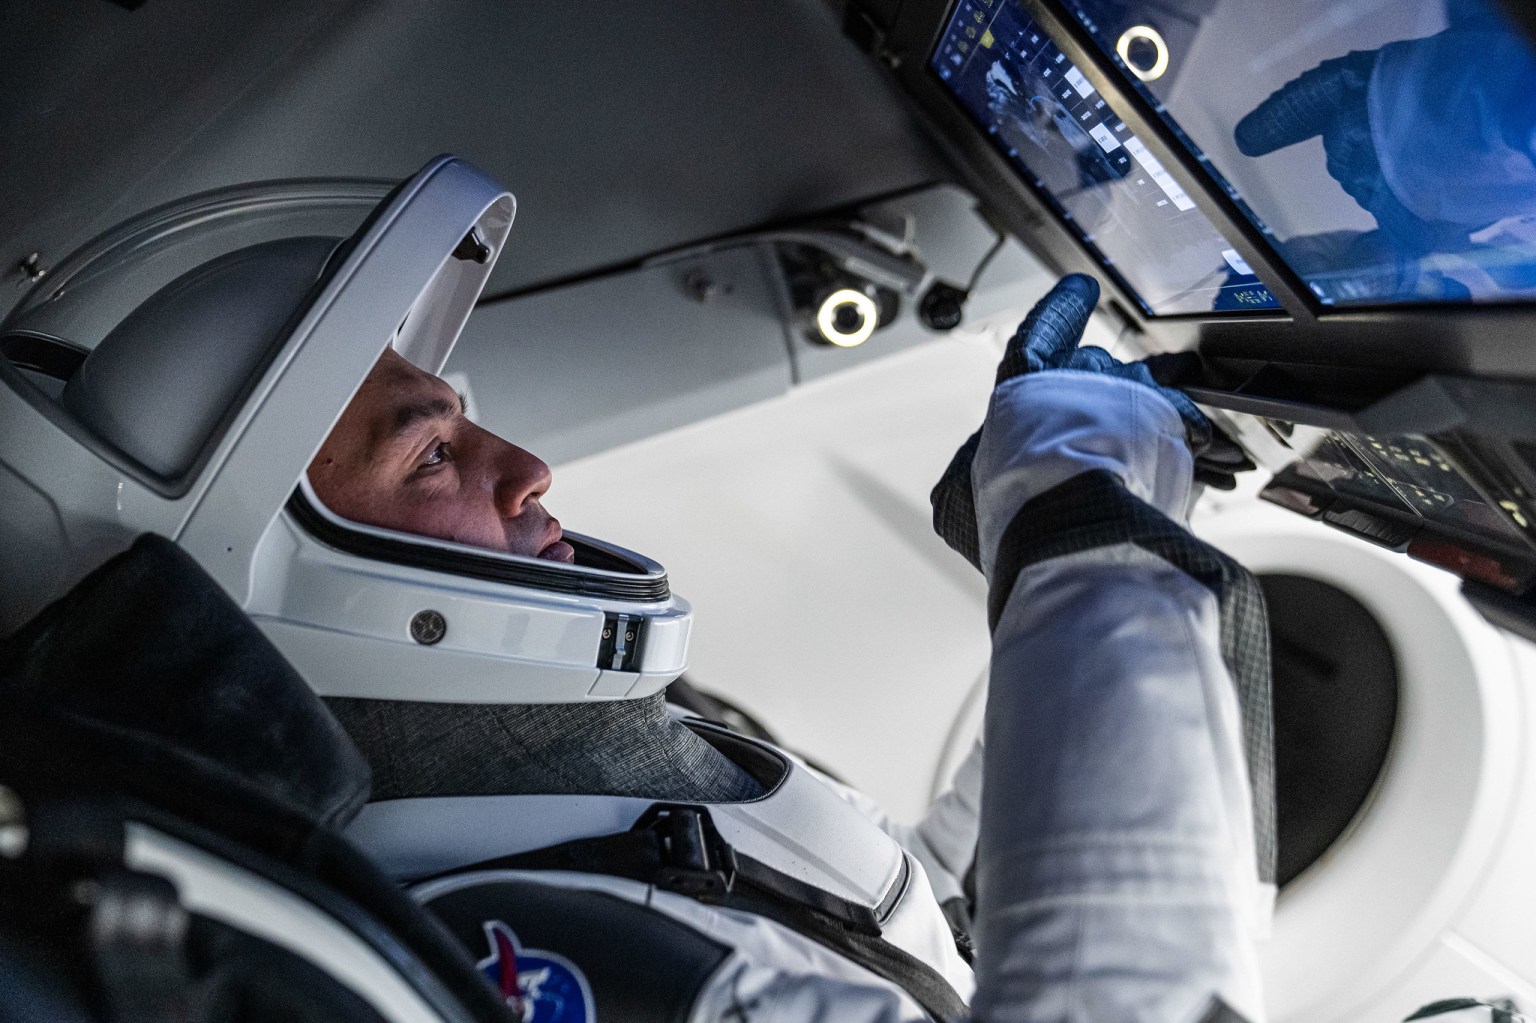 NASA astronaut and SpaceX Crew-4 Commander Kjell Lindgren, representing NASA's Commercial Crew Program, is pictured during a training session inside a mockup of the Crew Dragon vehicle at SpaceX Headquarters in Hawthorne, California.